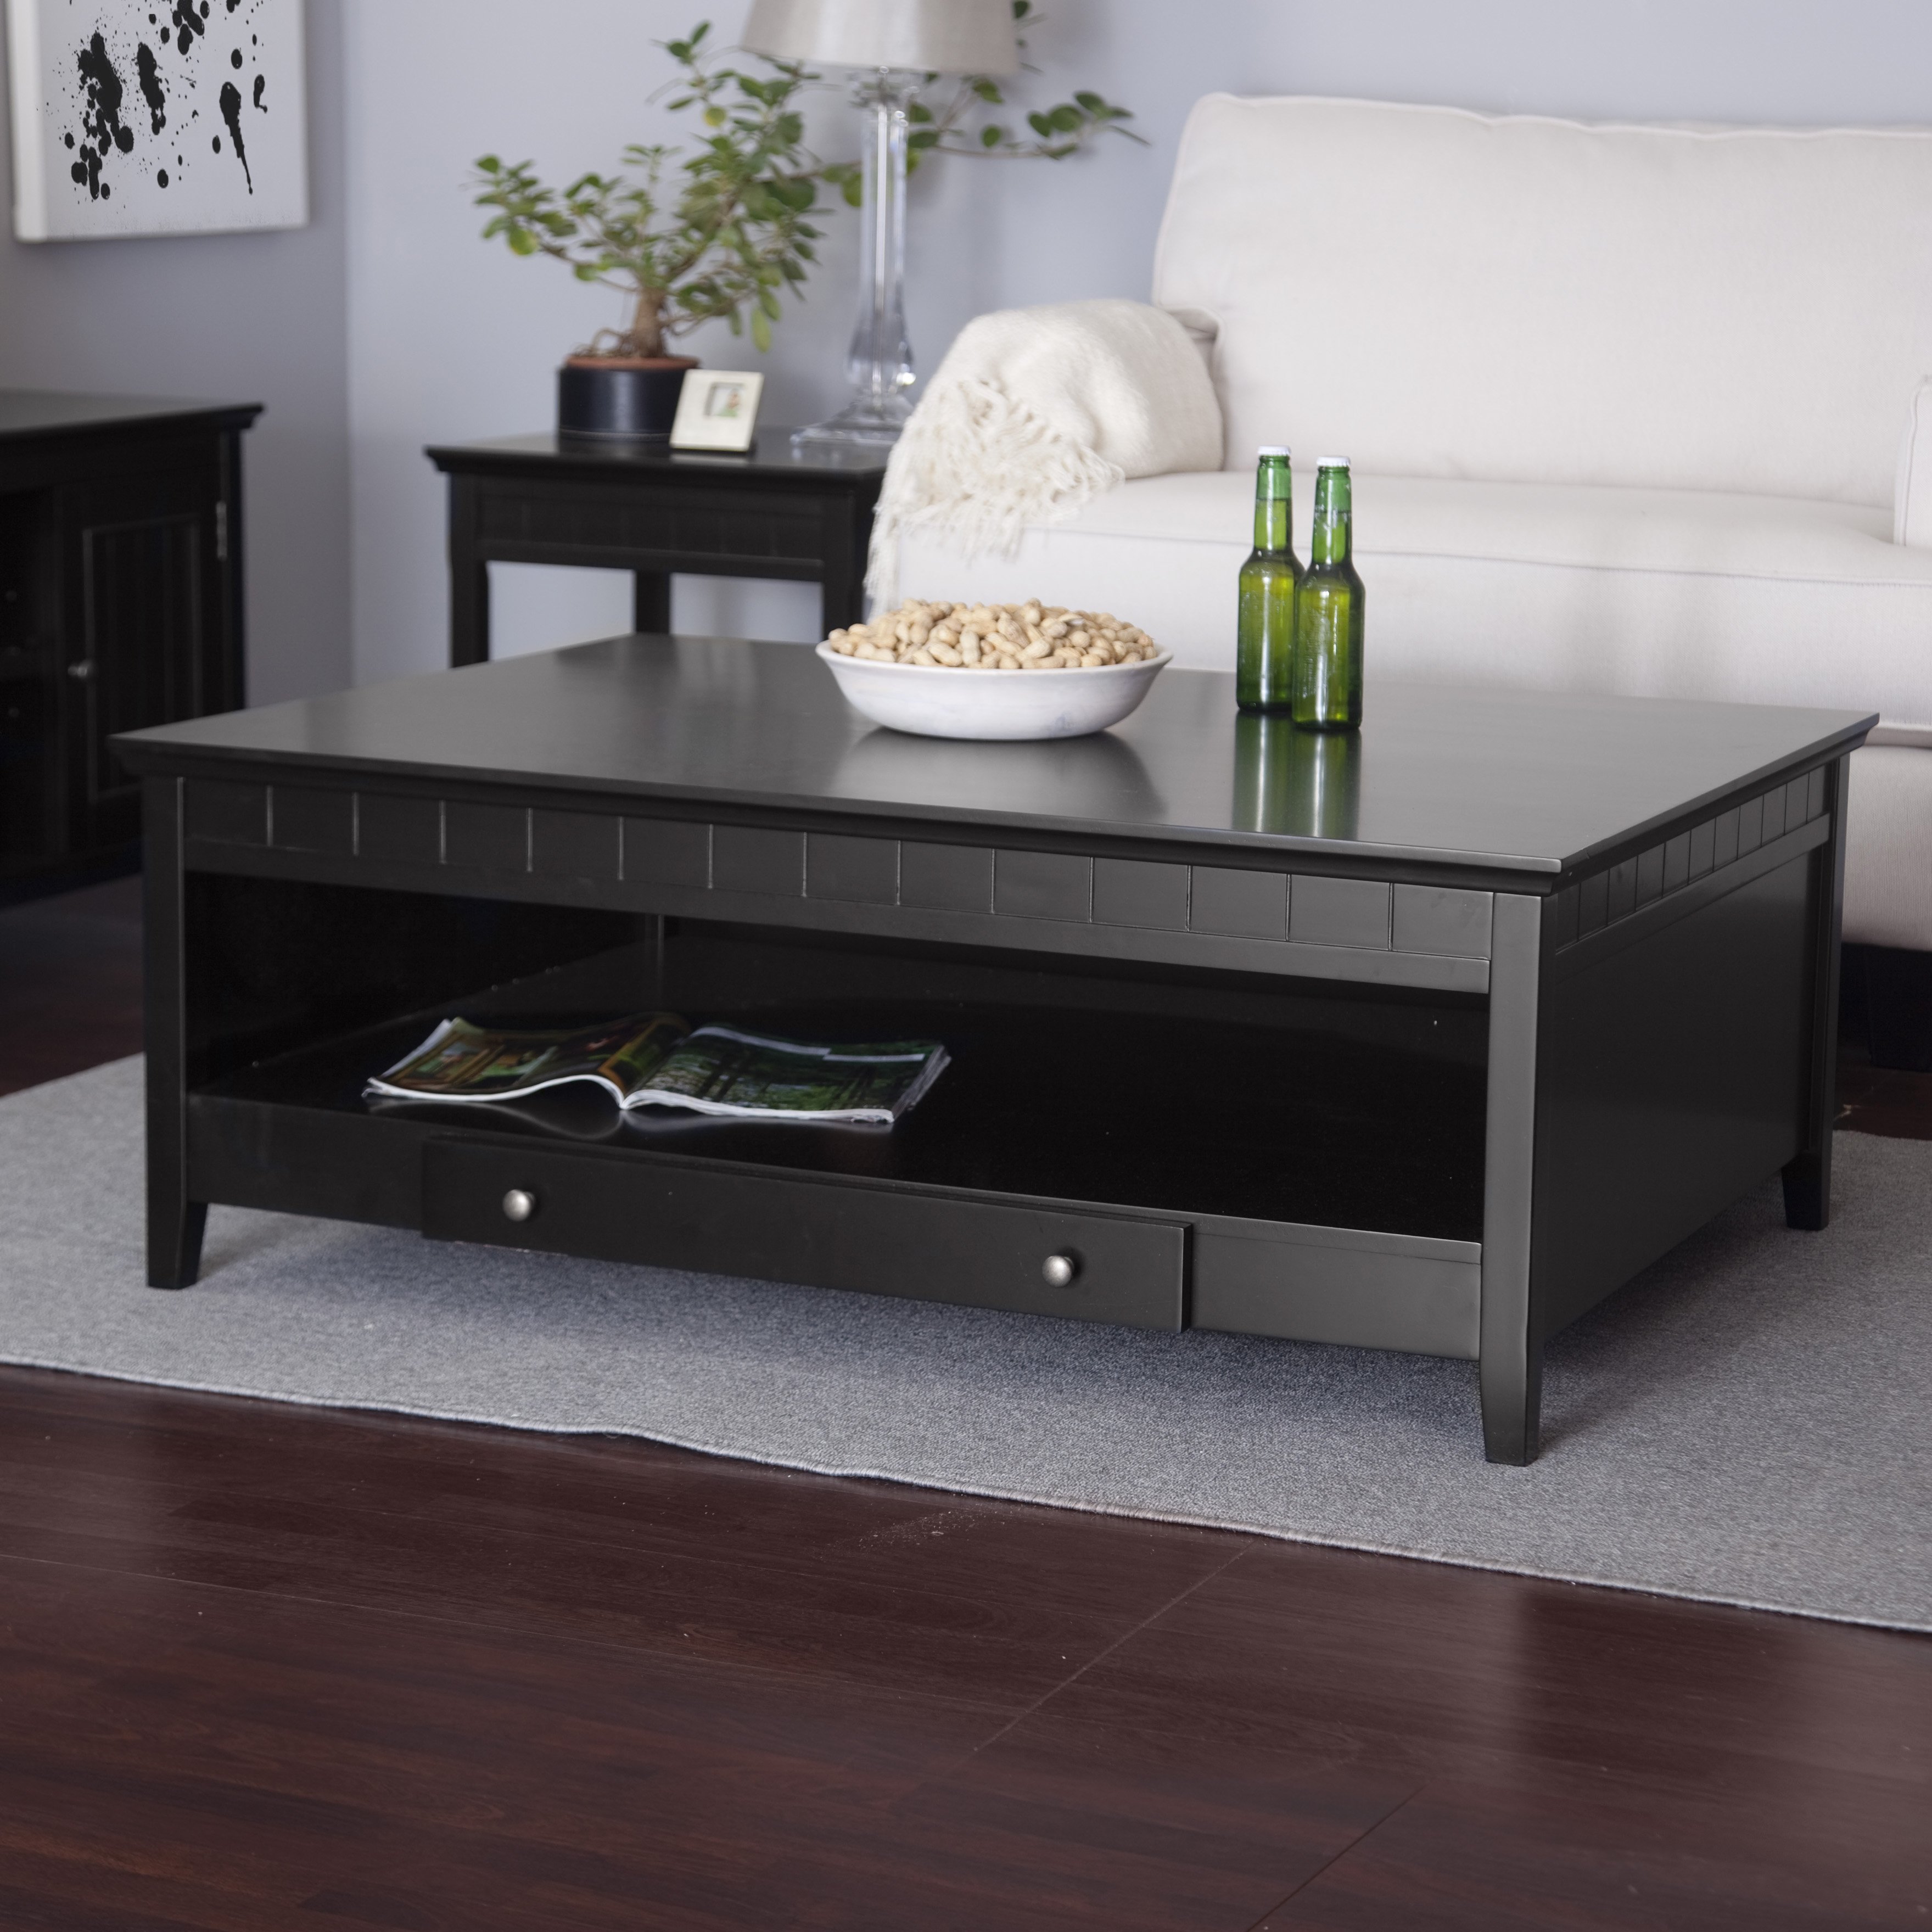 amazing large black coffee table full size furnish ideas tables latest glass nazpajl end and white marble trunk toronto unique pallet indoor dog house furniture rustic industrial